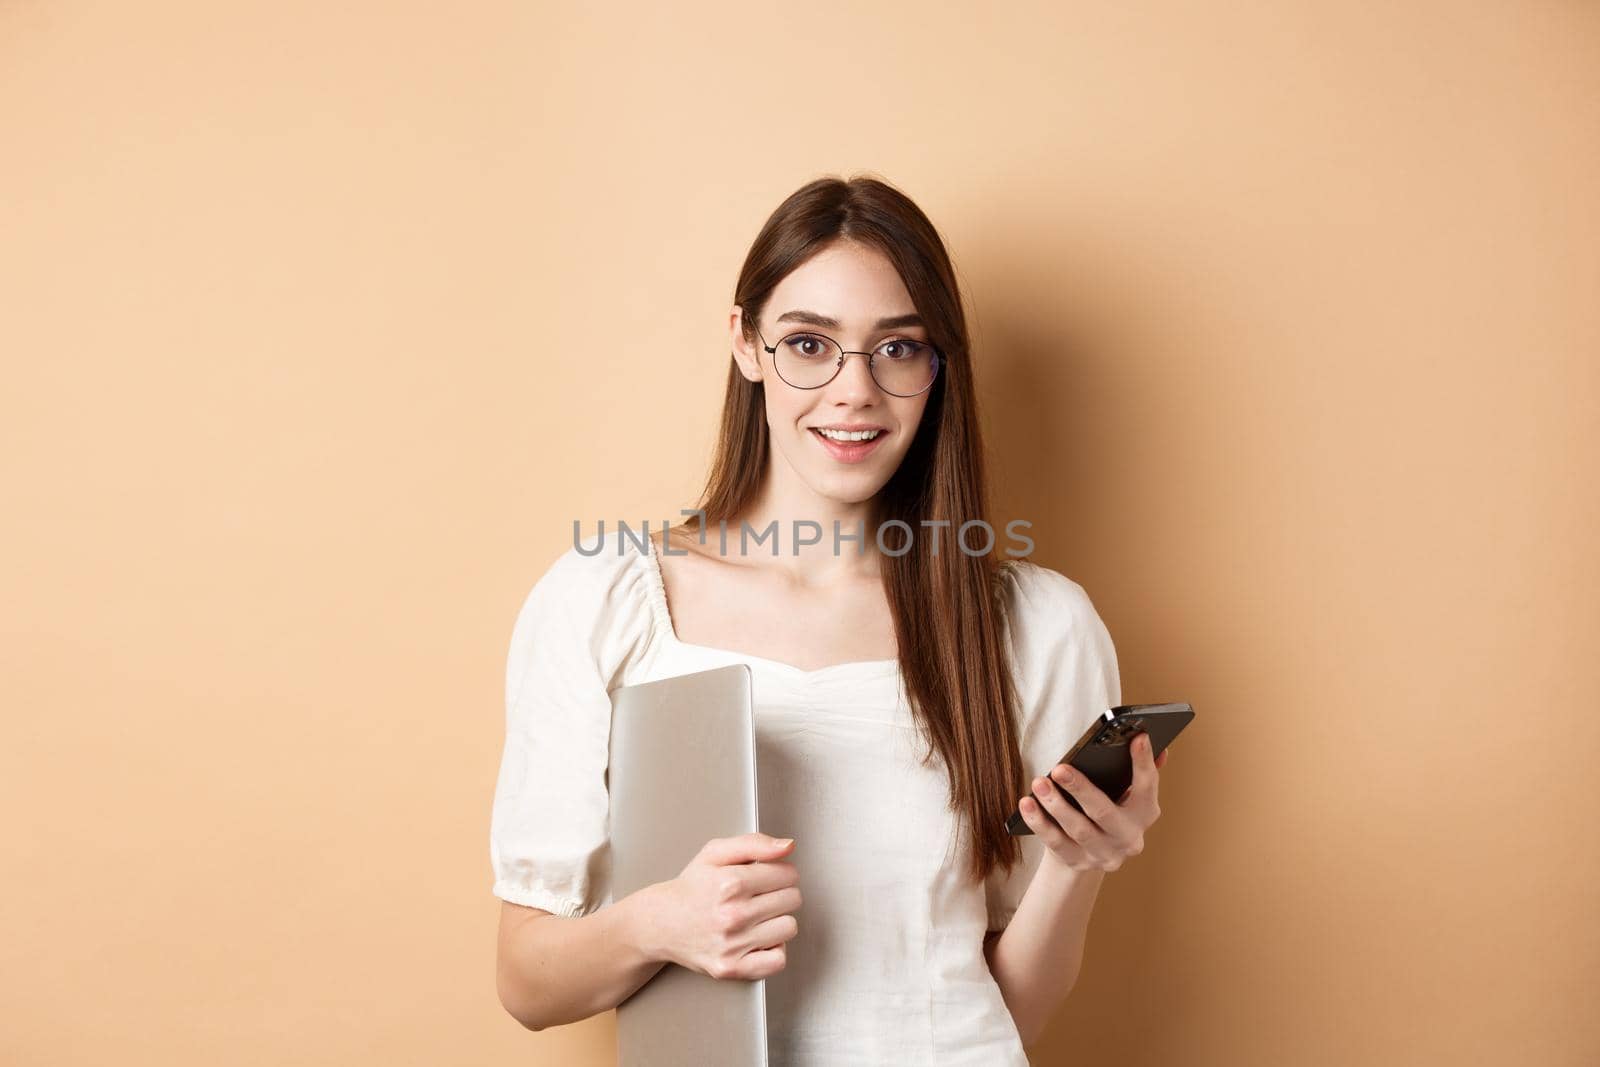 Smiling young woman in glasses reading exciting news on mobile phone, holding laptop and looking happy at camera, standing on beige background.